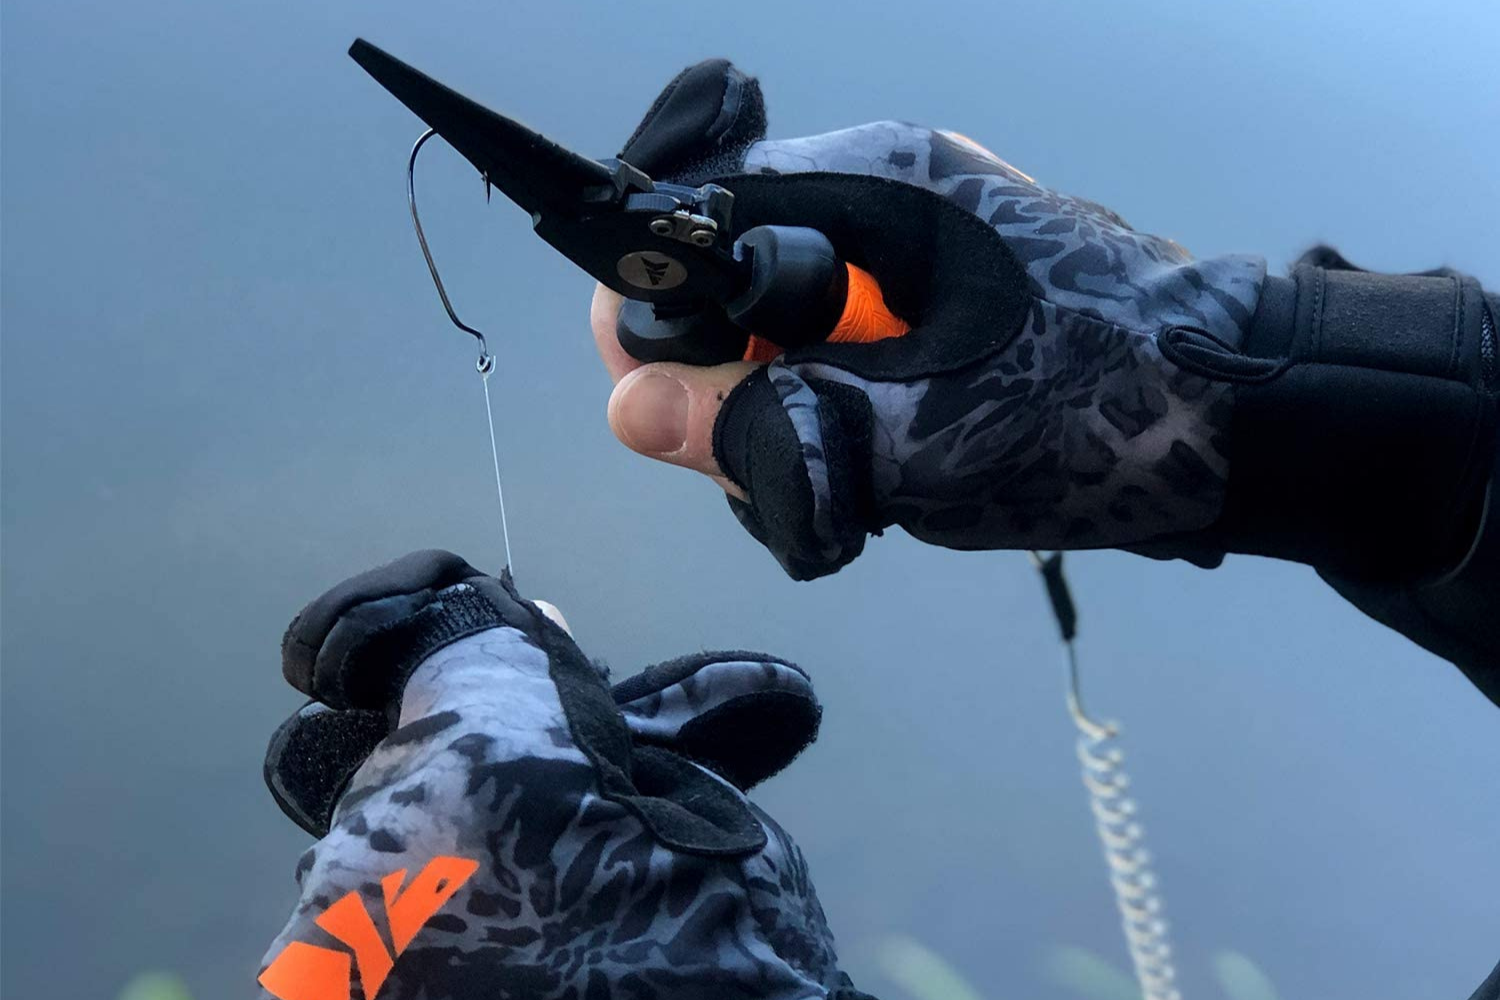 The Best Fishing Pliers for Unhooking Your Catch - Bob Vila